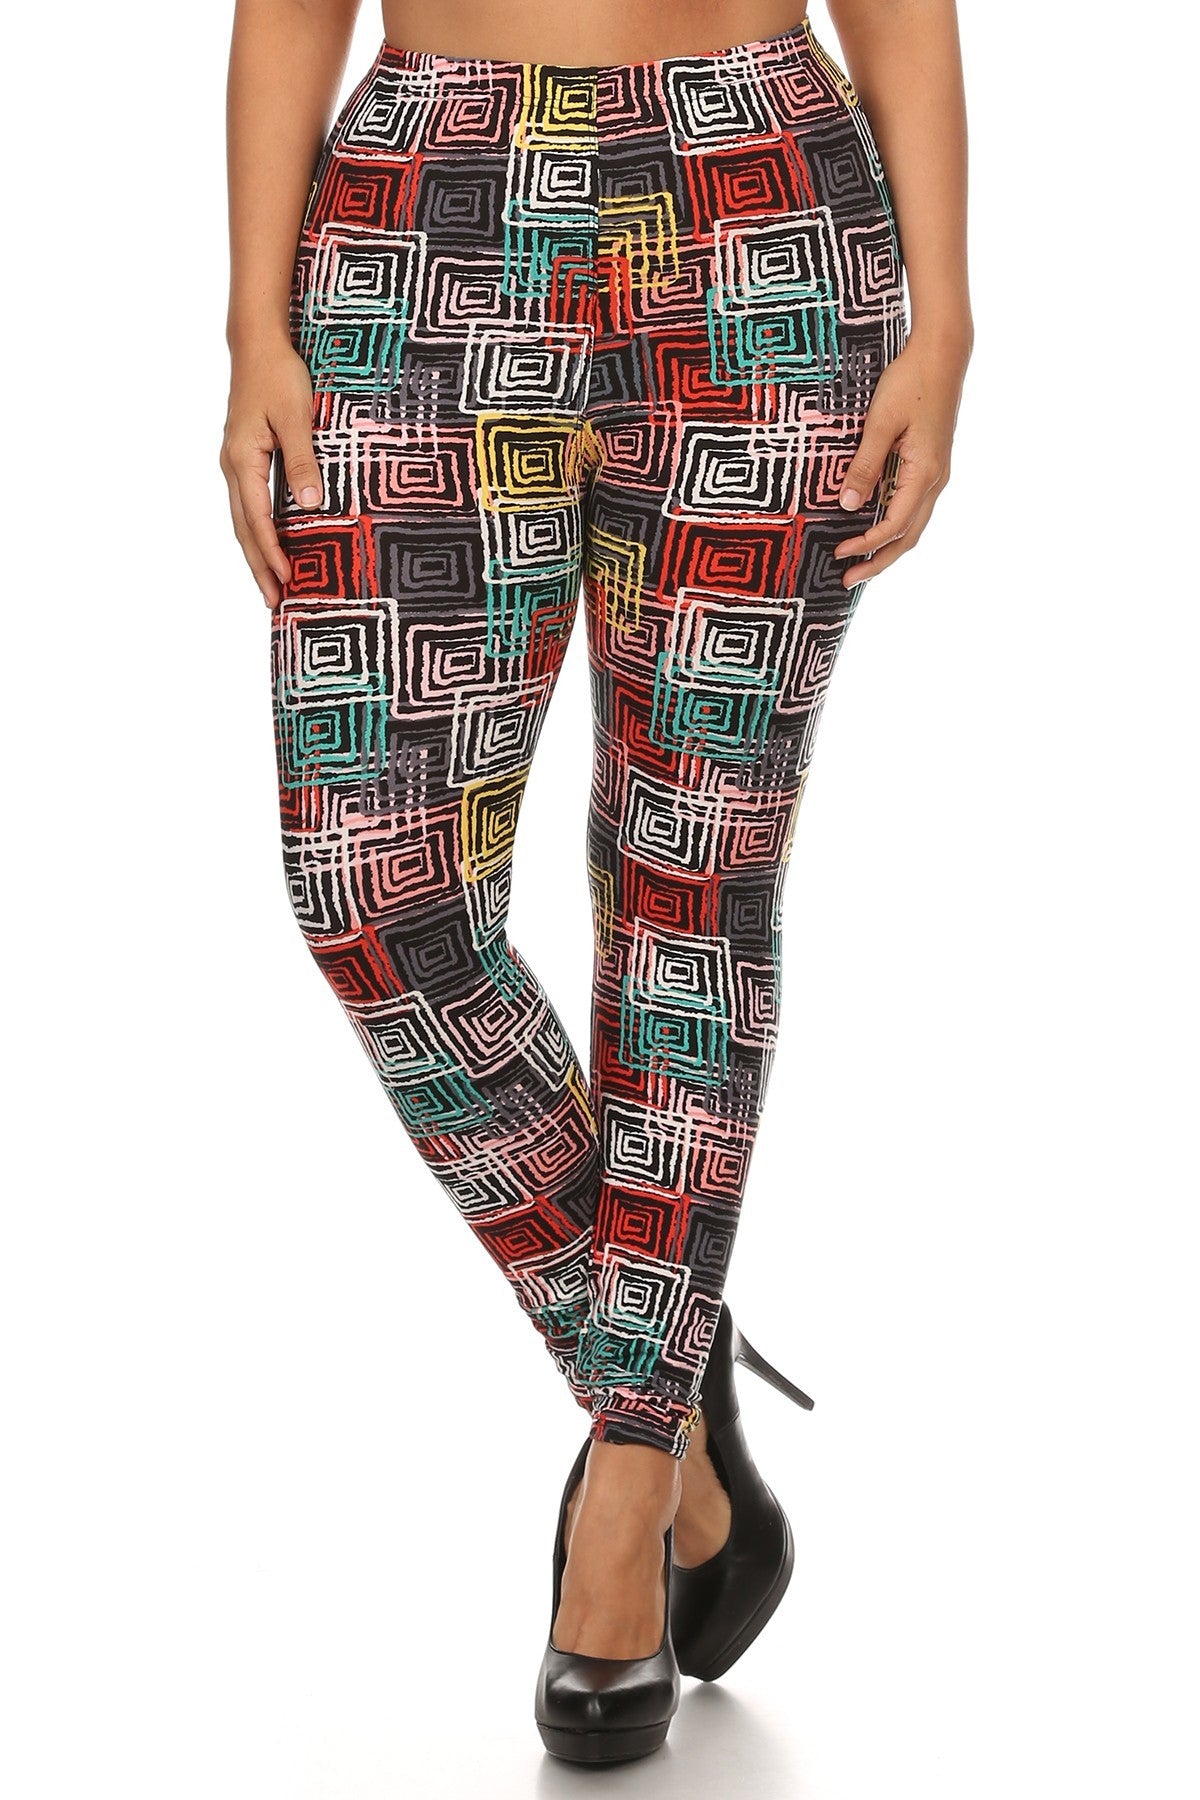 Abstract Geometric Printed Knit Legging With Elastic Waistband, And High Waist Fit